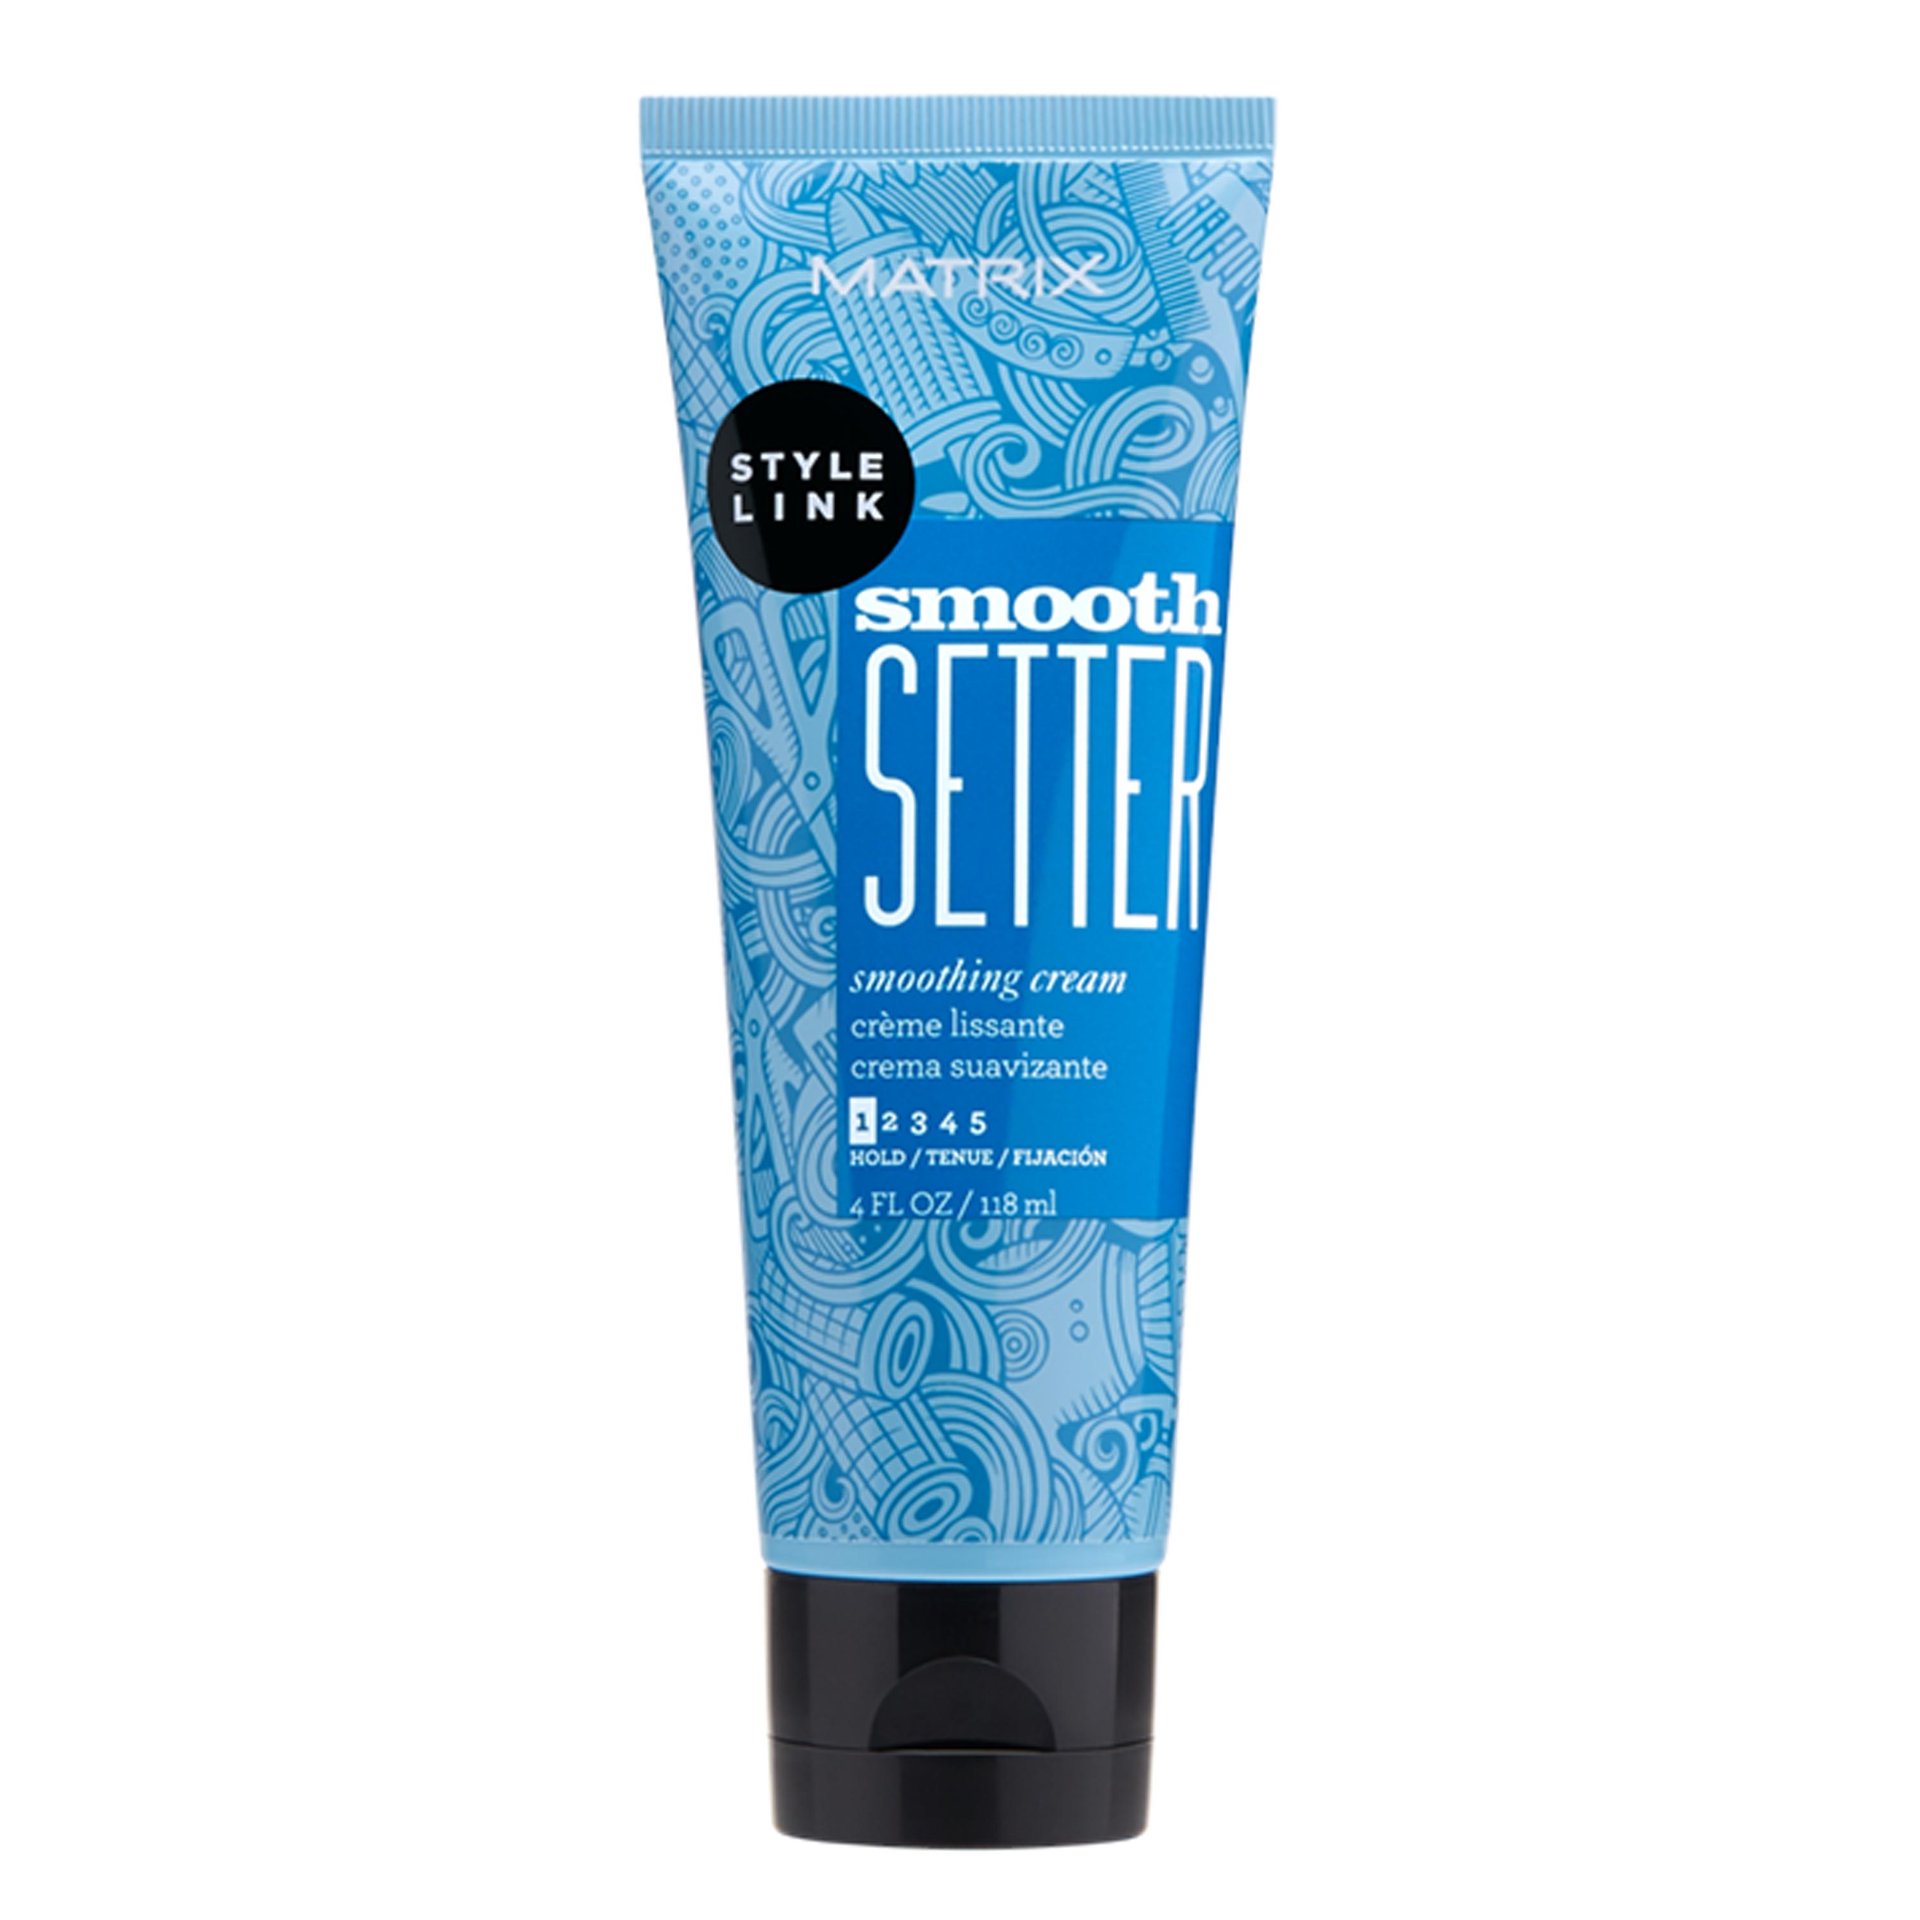 StyleLink Smooth Setter Cream For Frizz Control